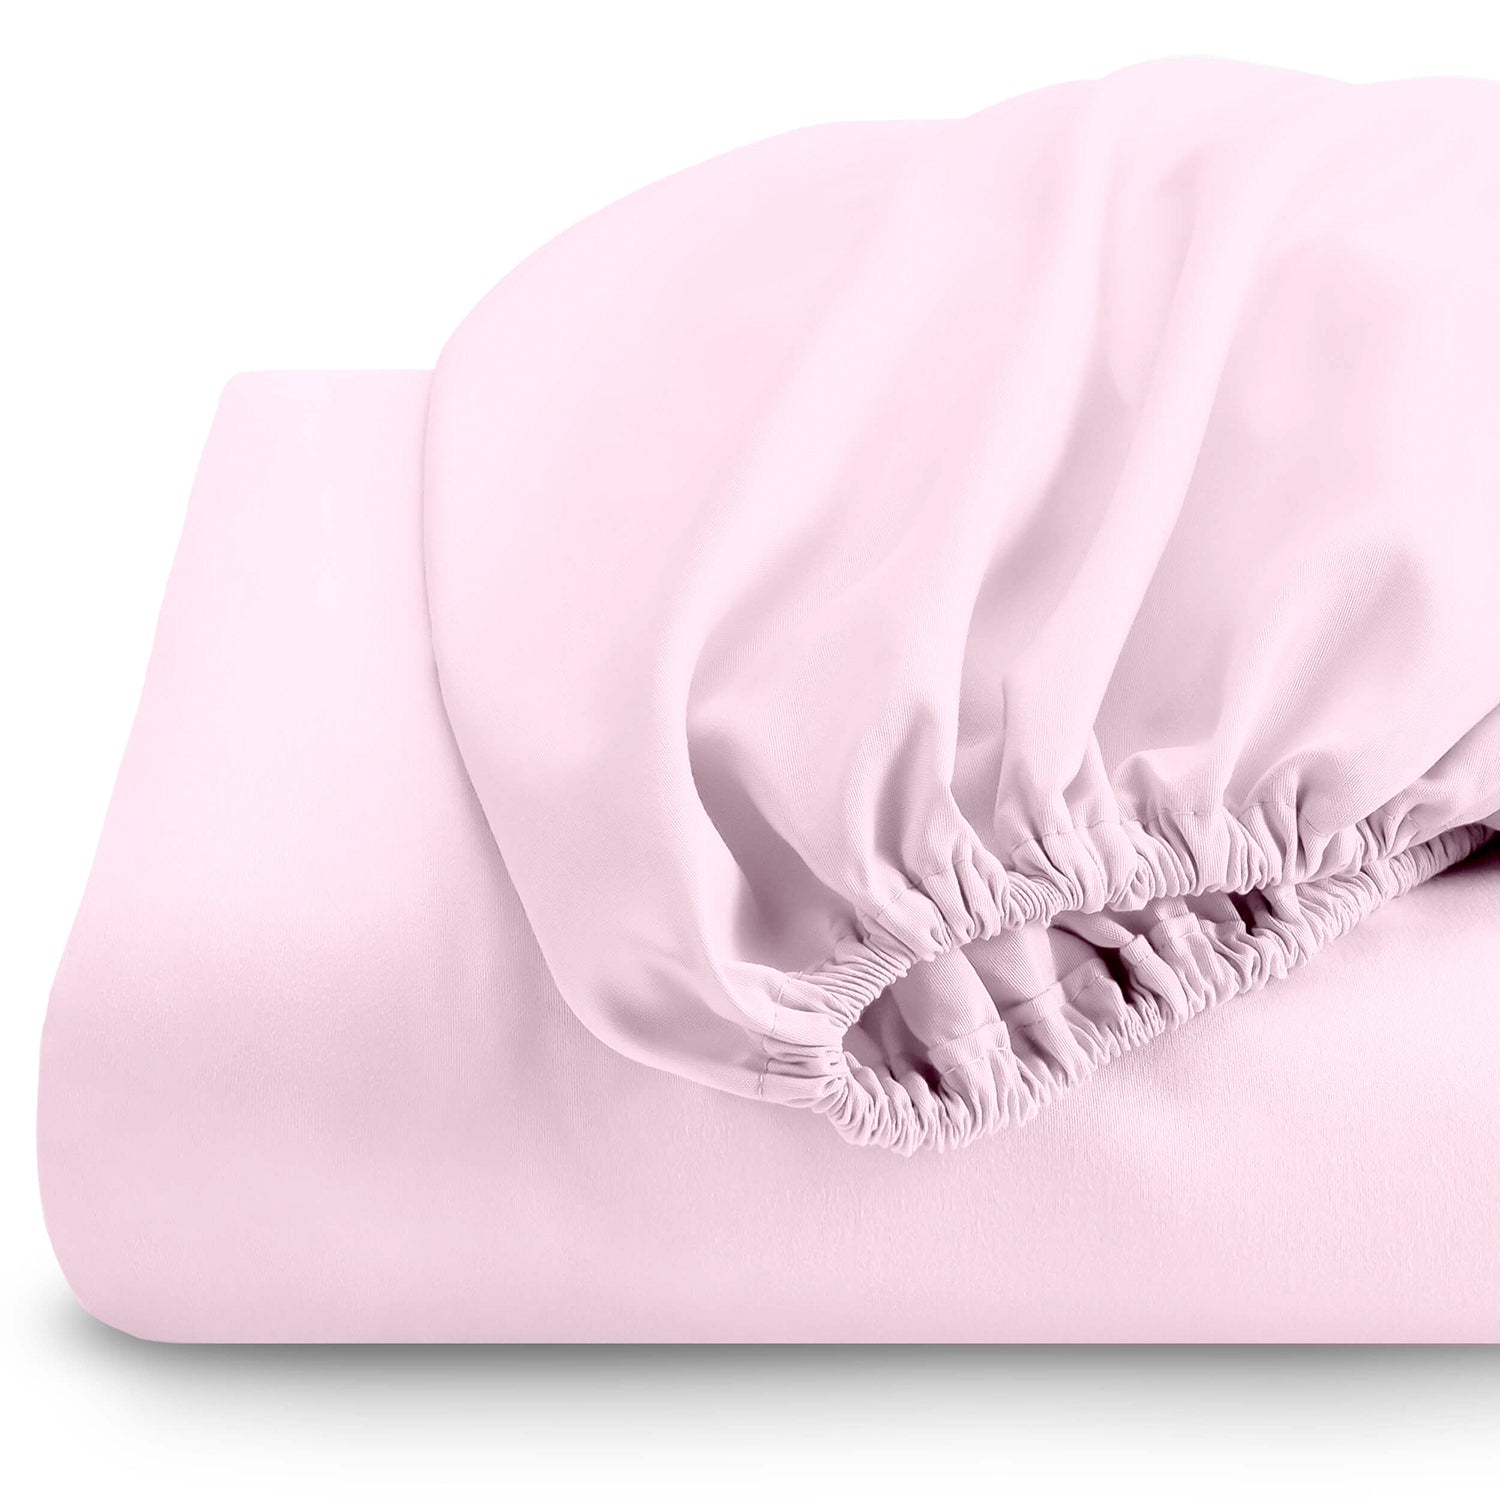 Super Soft fitted sheet 90x200+20 CM - Pink